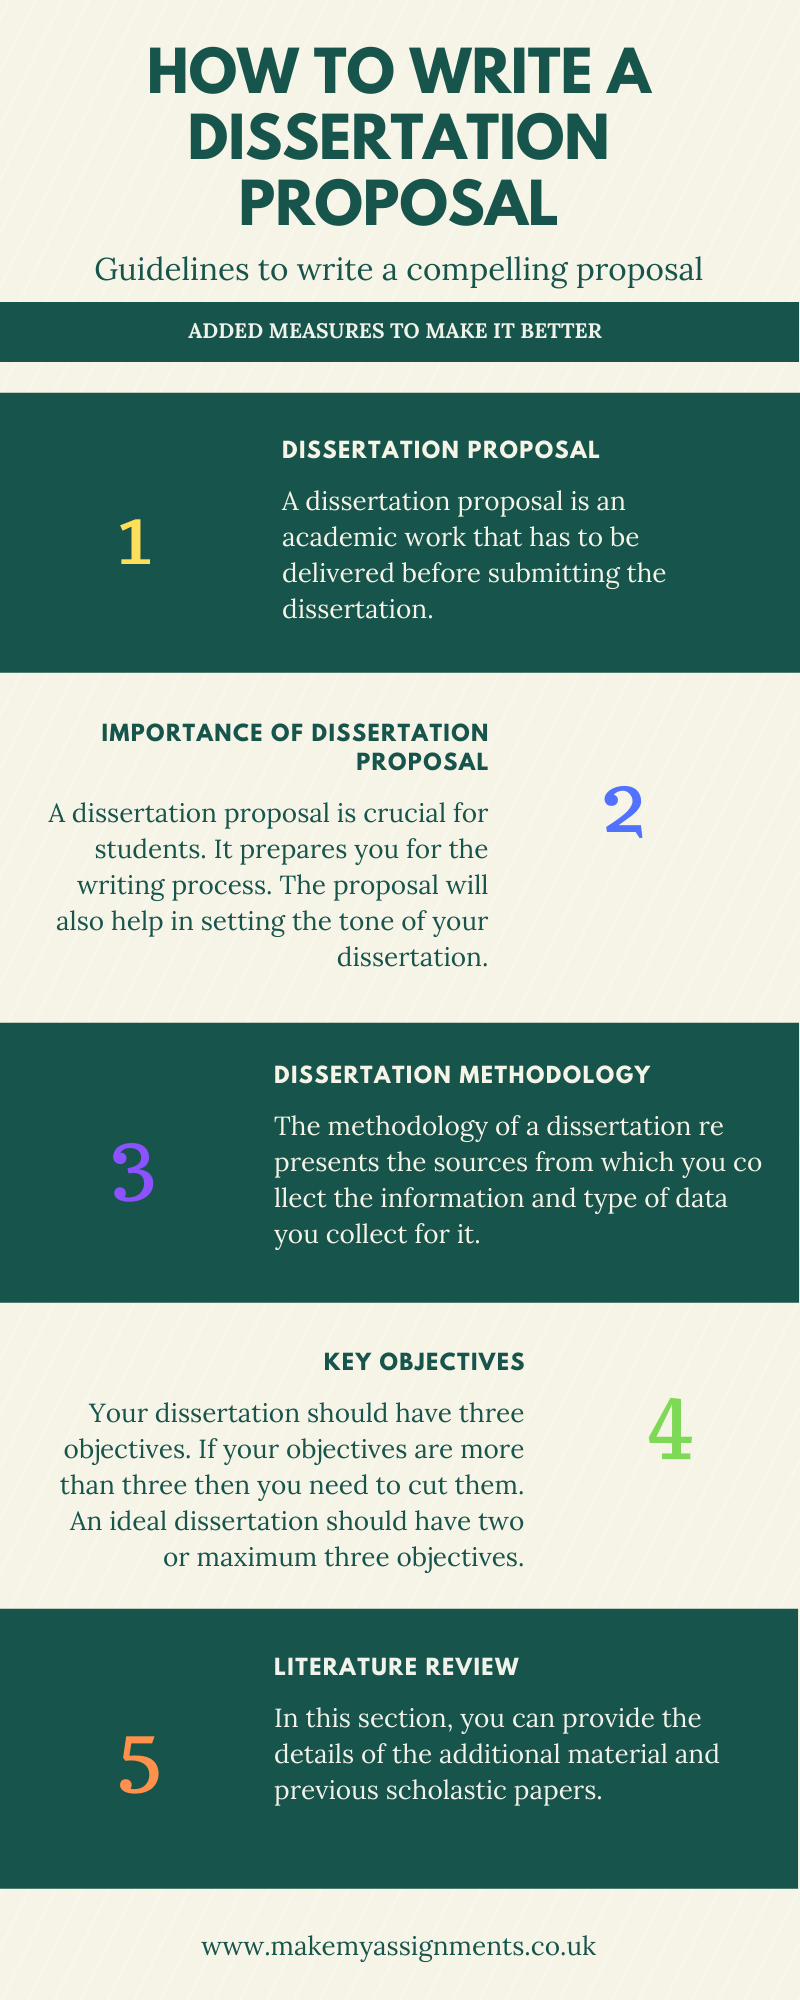 How to write a Dissertation Proposal